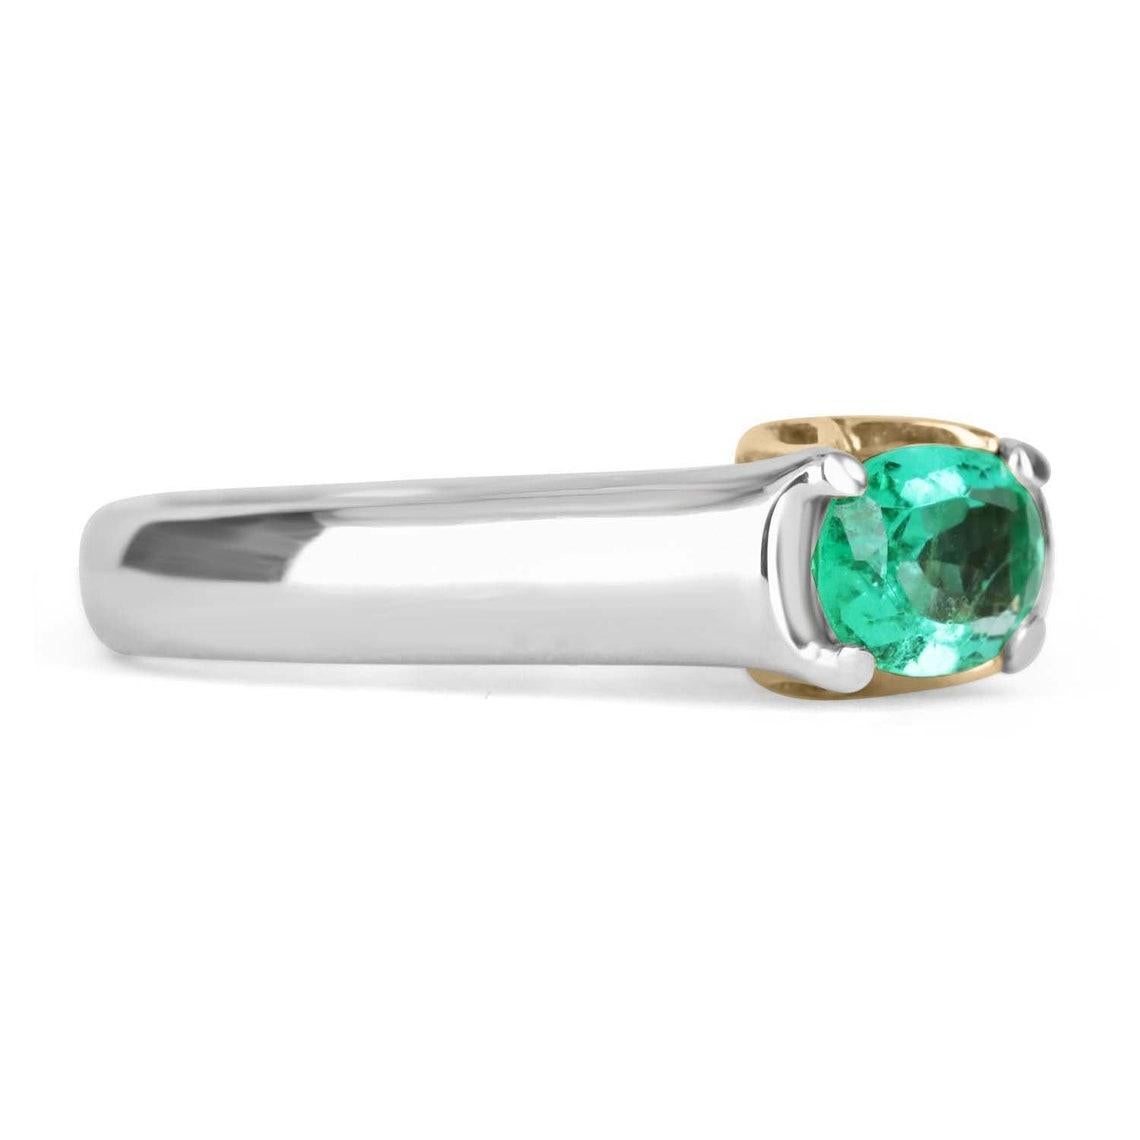 Displayed is a classic Colombian emerald solitaire oval-cut engagement ring in platinum & 18K gold. This gorgeous solitaire ring carries a full 1.06-carat emerald in a four-prong, East to West setting. Fully faceted, this gemstone showcases